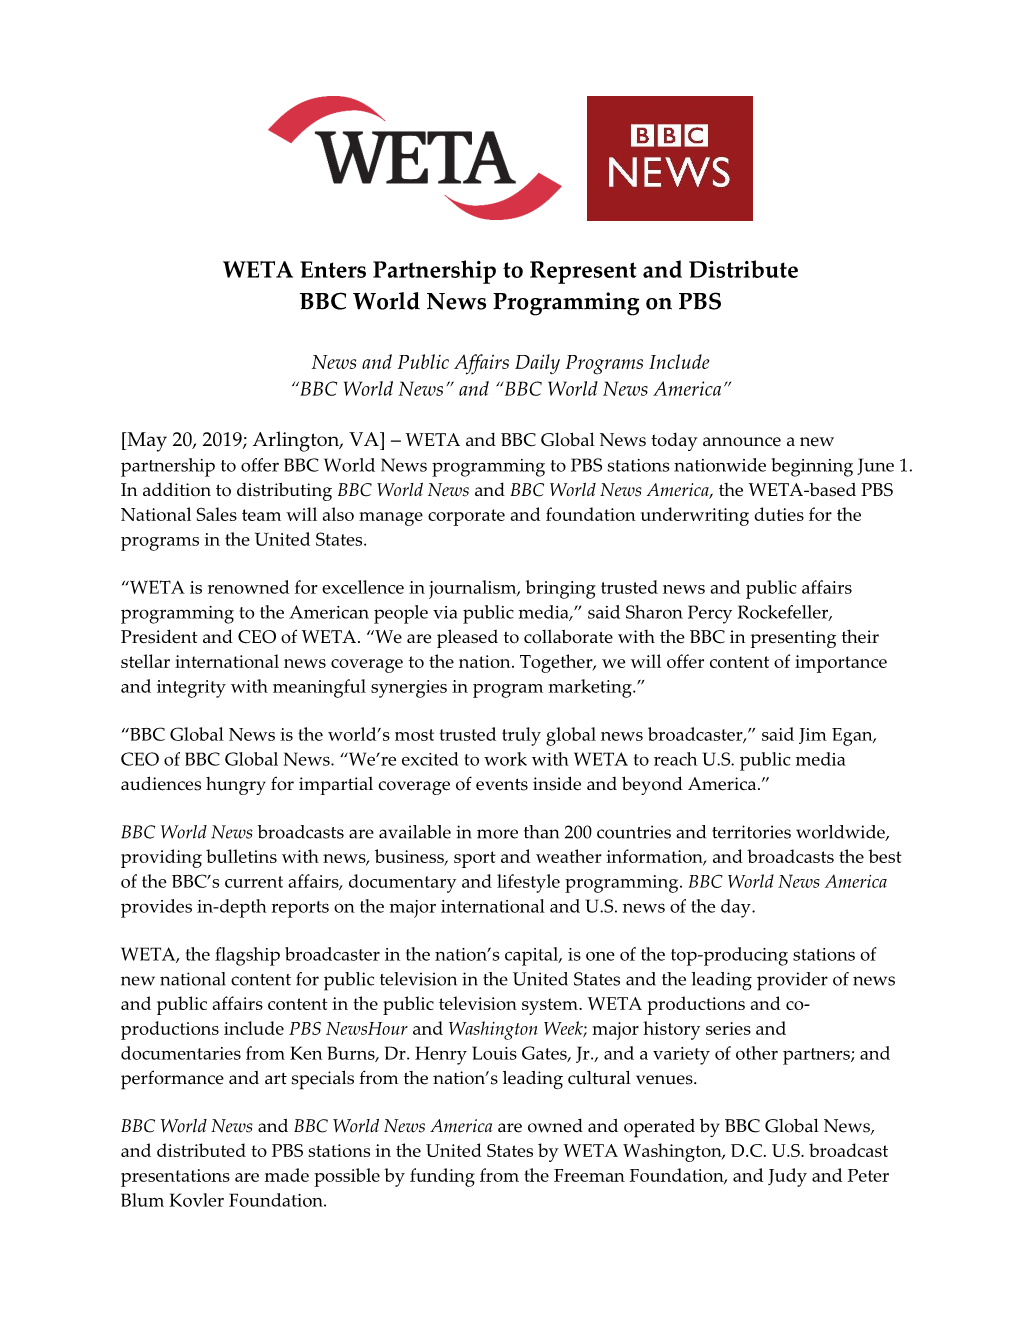 WETA Enters Partnership to Represent and Distribute BBC World News Programming on PBS